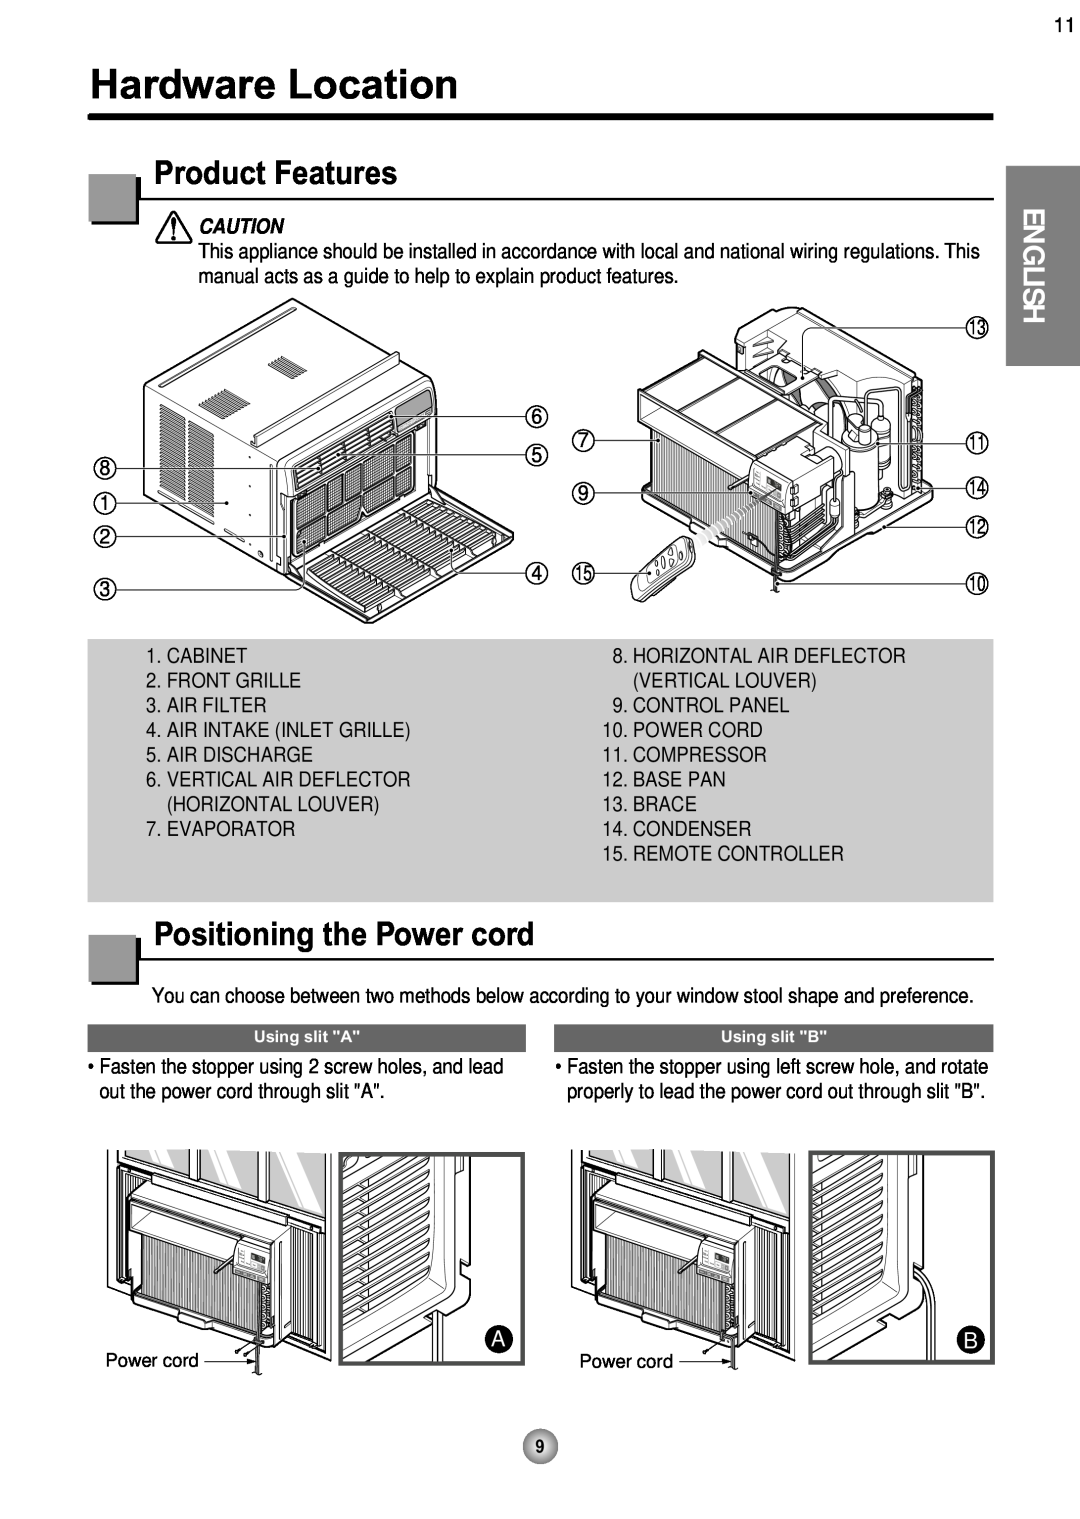 Friedrich CP08 operation manual Hardware Location, Product Features, Positioning the Power cord, English 